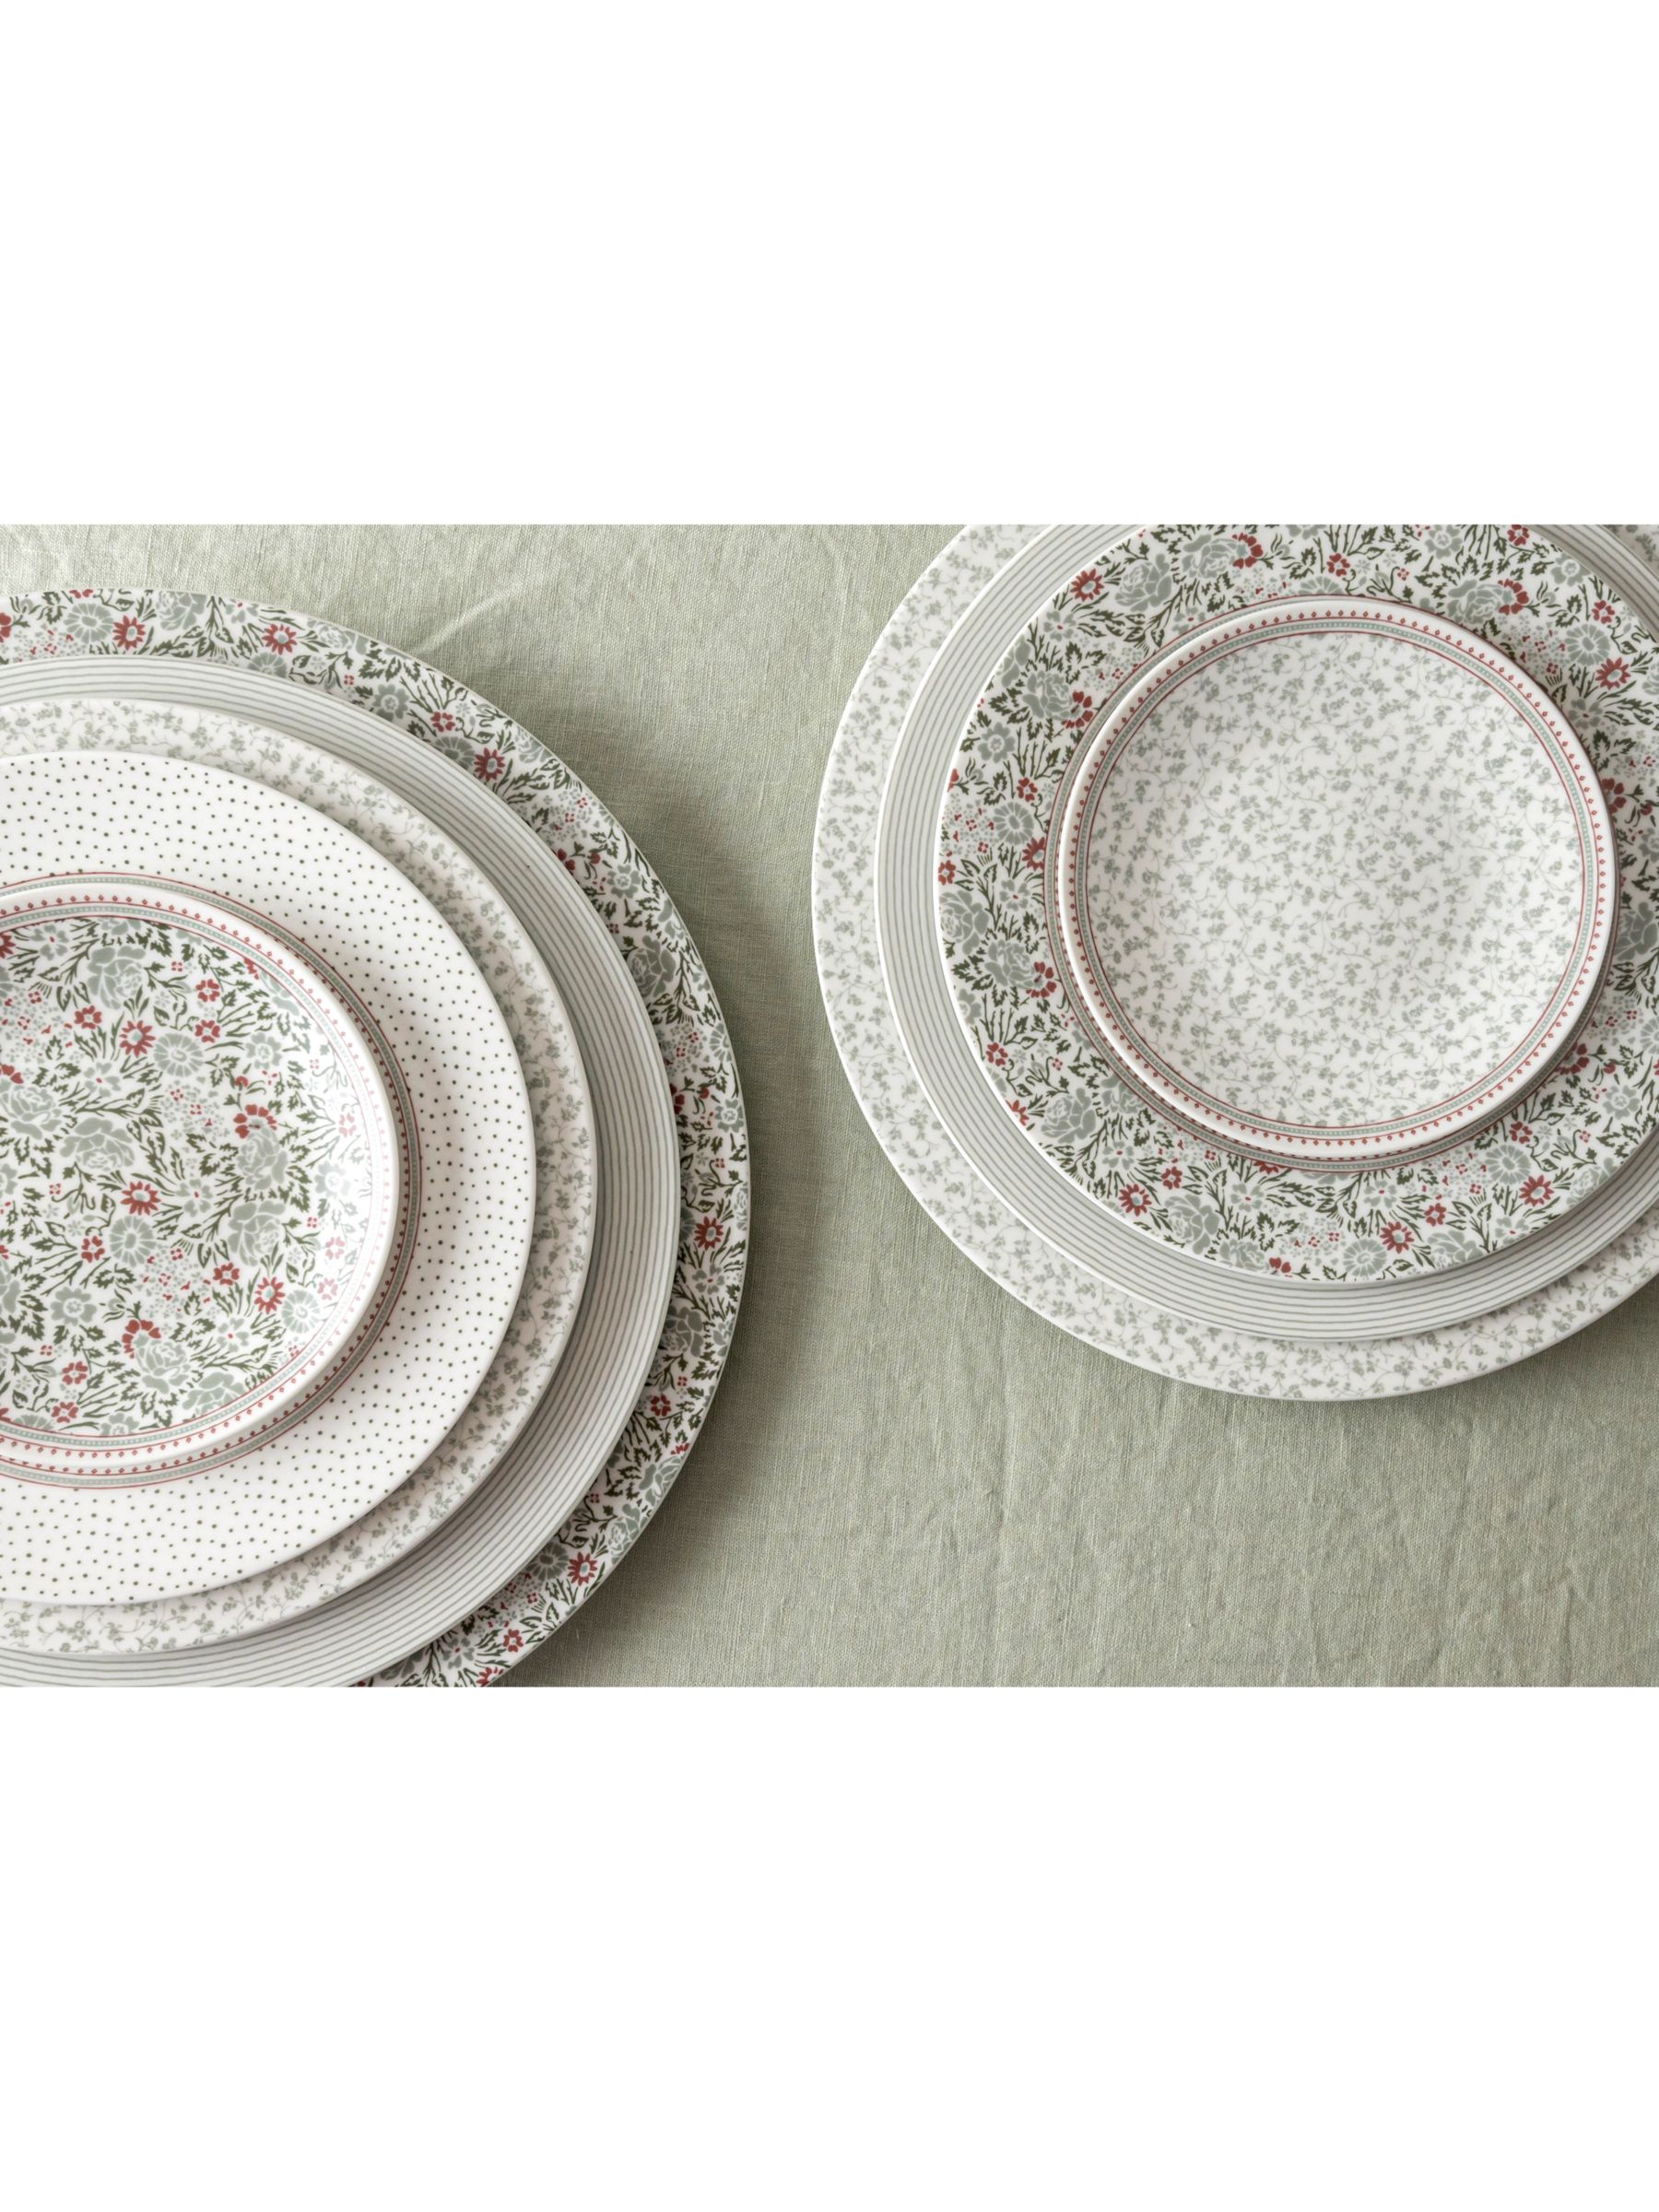 4, Plate, Set Wild Dinner Ashley of Laura Collectables 27.5cm, Green Clematis White/Sage